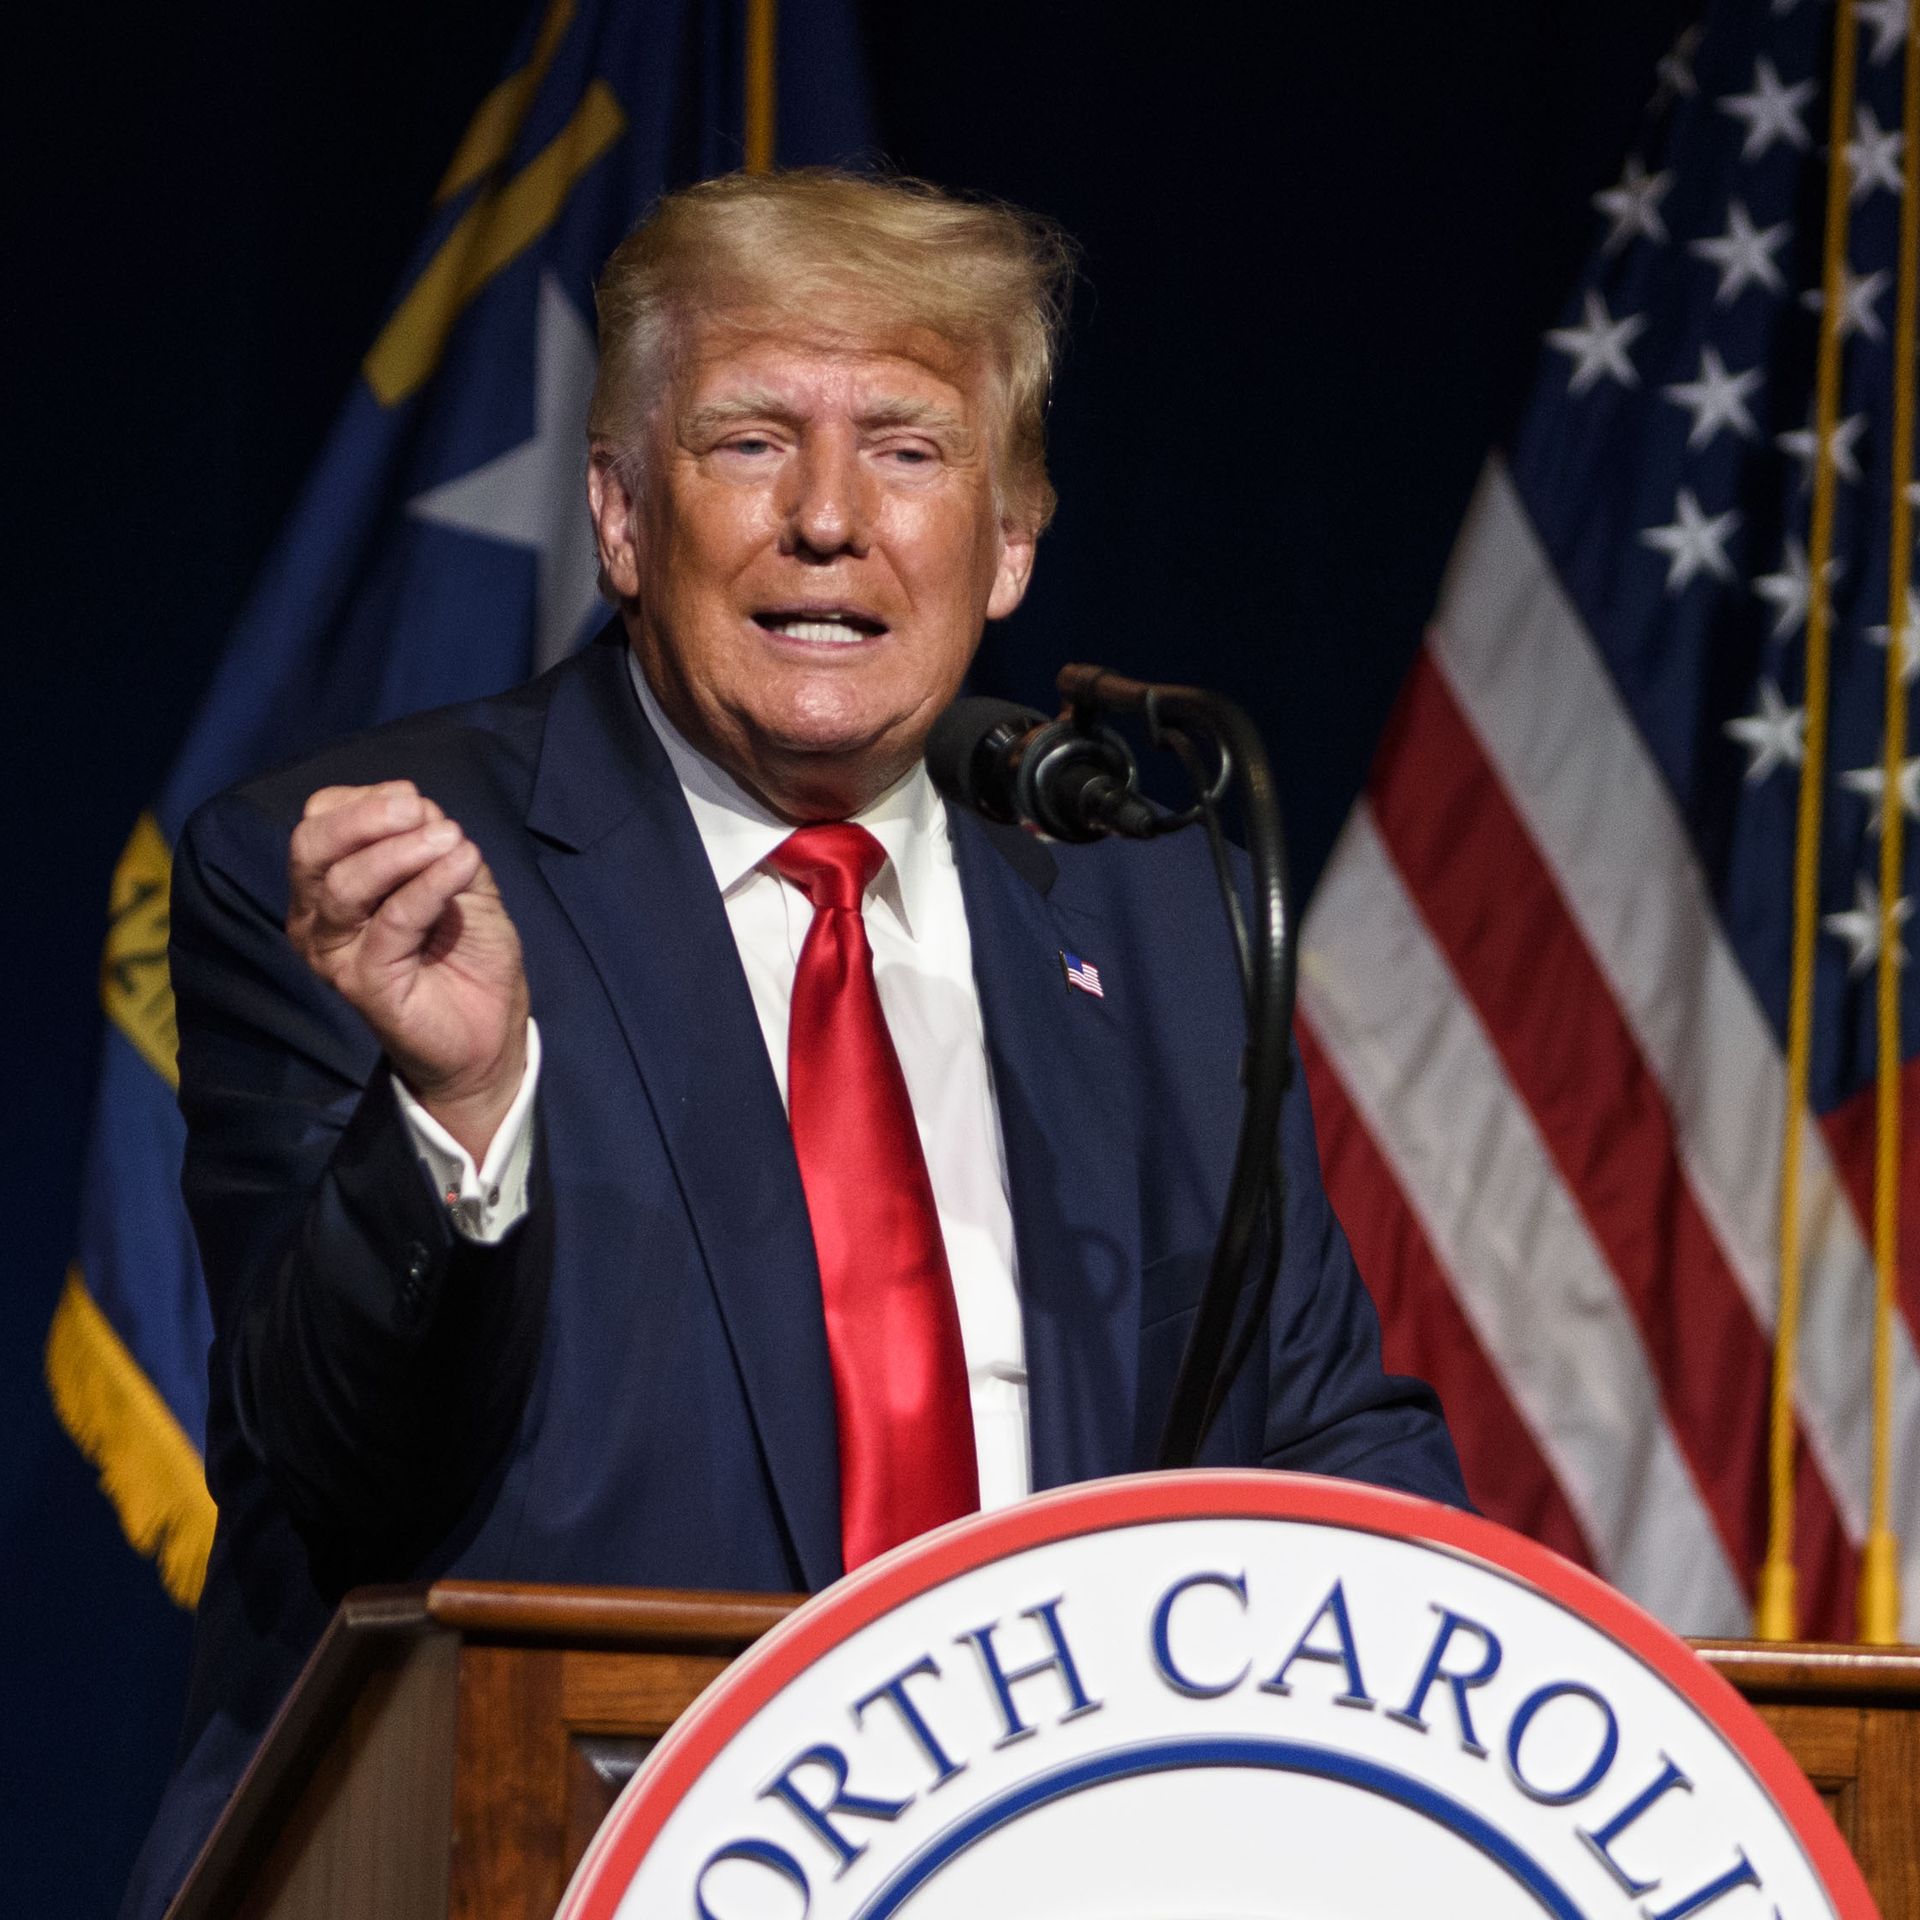 Former U.S. President Donald Trump addresses the NCGOP state convention on June 5, 2021 in Greenville, North Carolina.